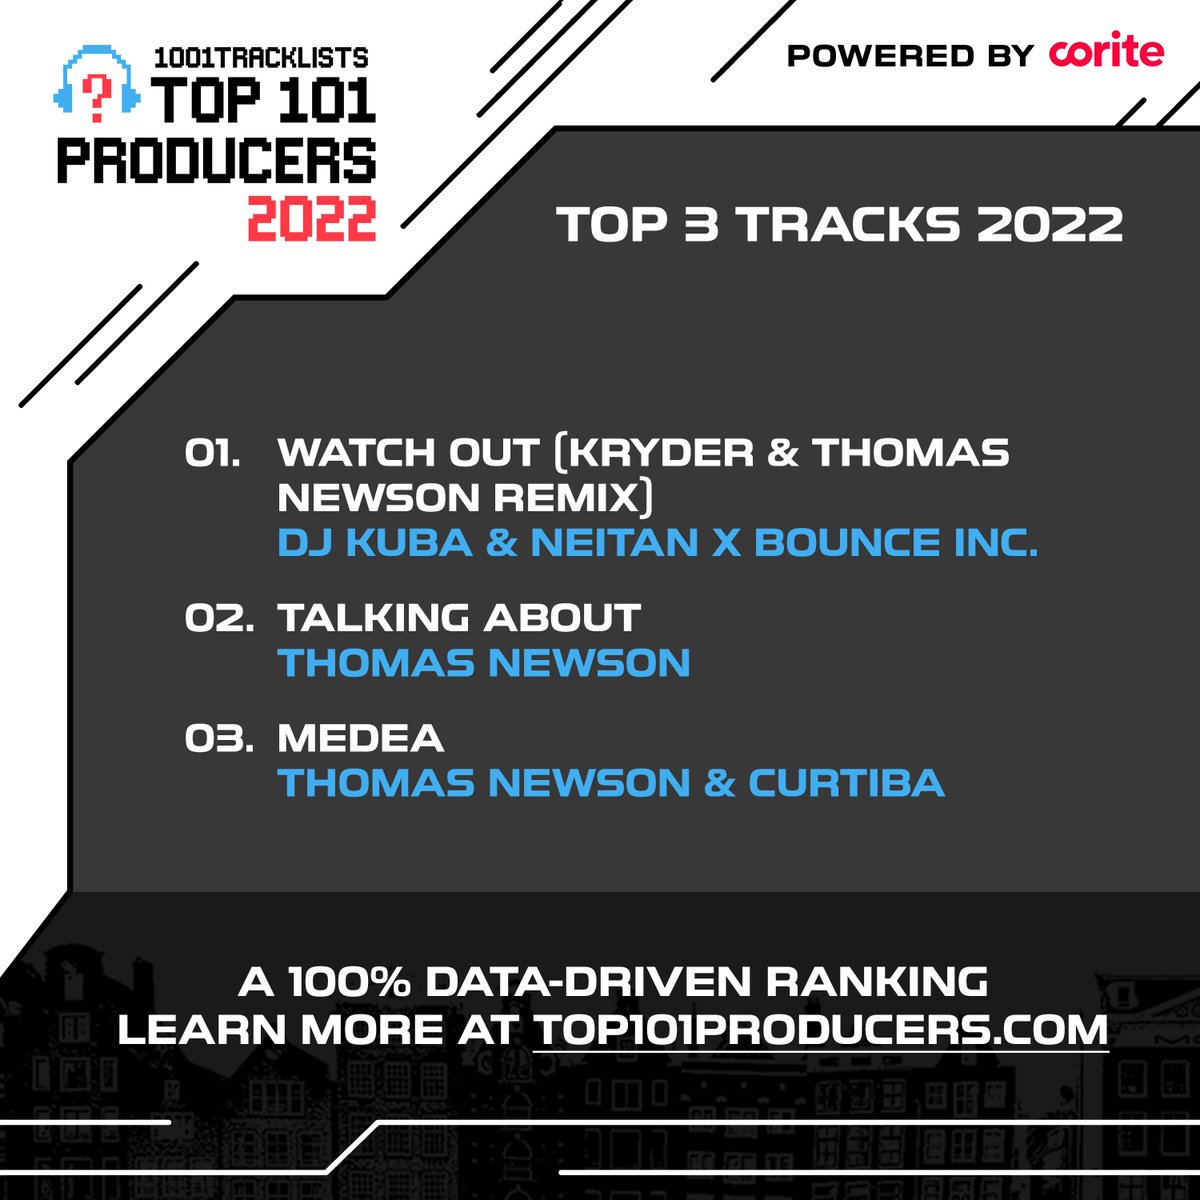 Making his first ever appearance in the rankings through his massive remix of 'Watch Out' together with @KryderMusic among other hit releases, @ThomasNewson comes in at #30 in the #Top101Producers2022.